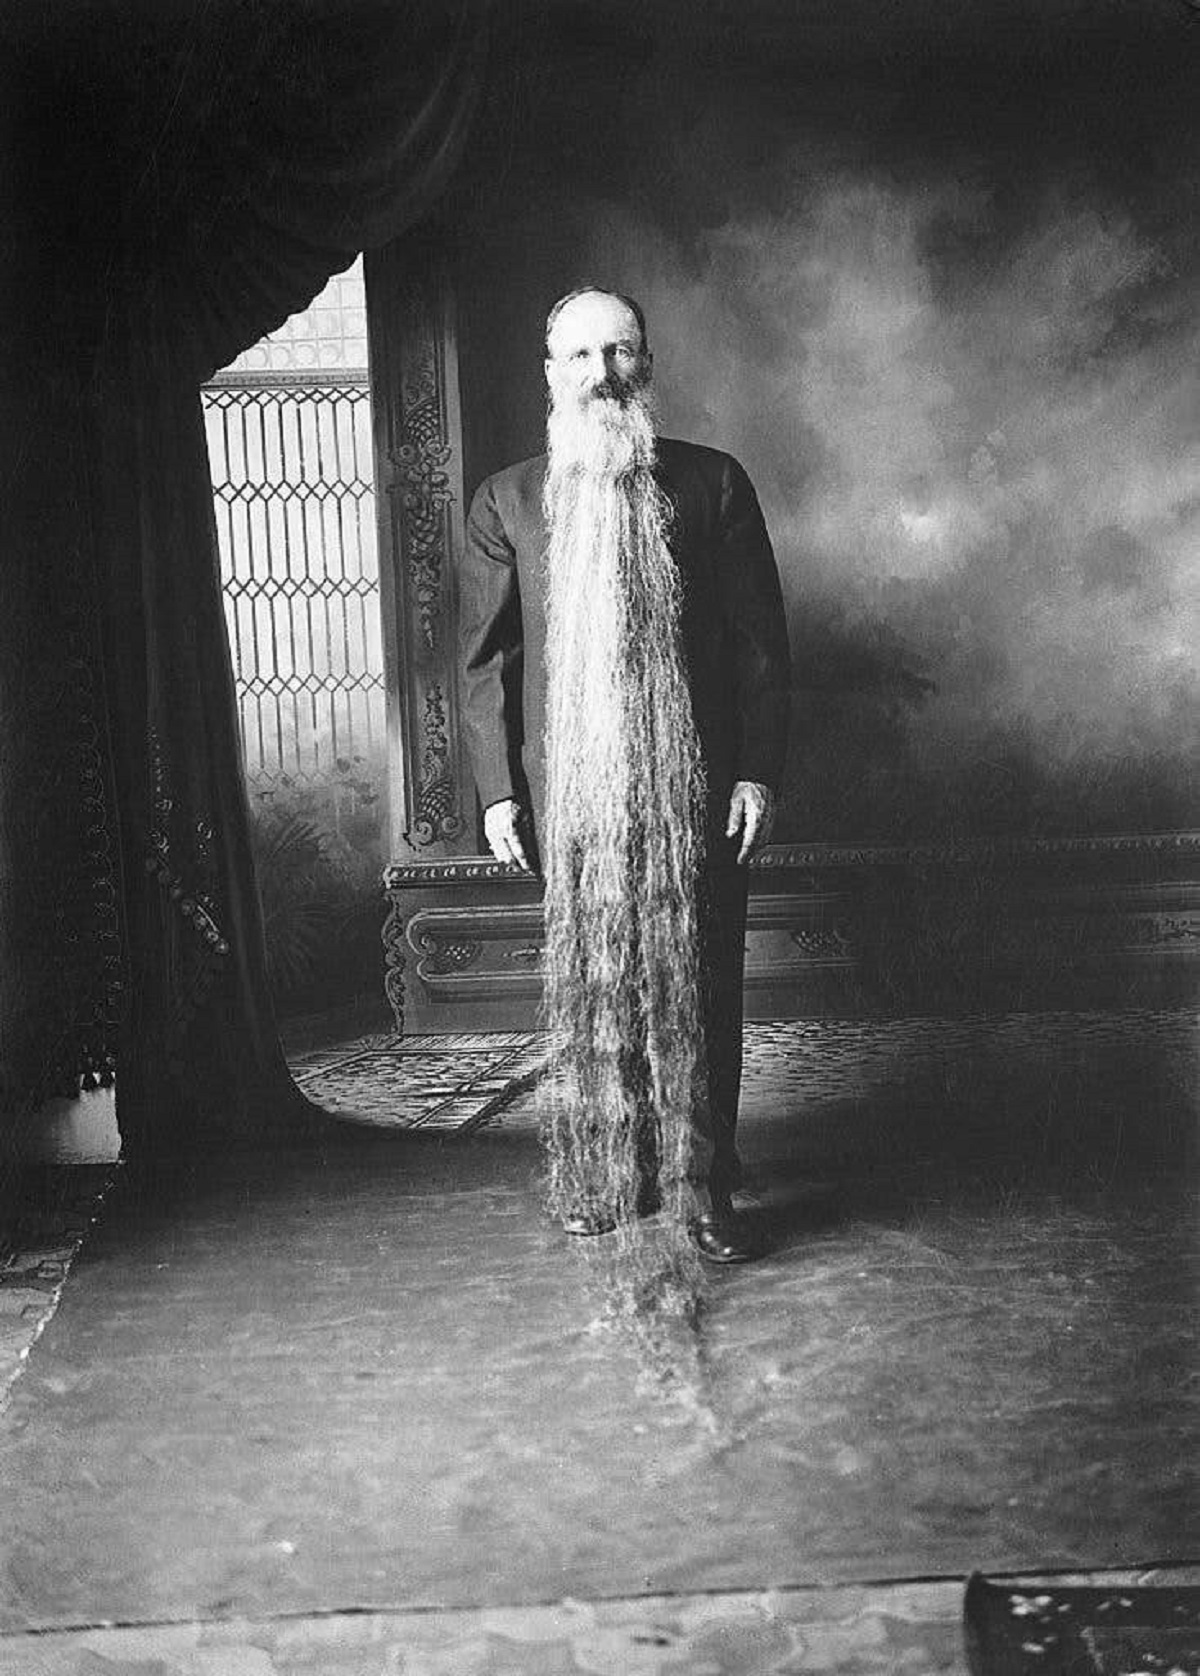 This bad boy is Zach T. Wilcox, owner of the world's longest beard, in 1922: